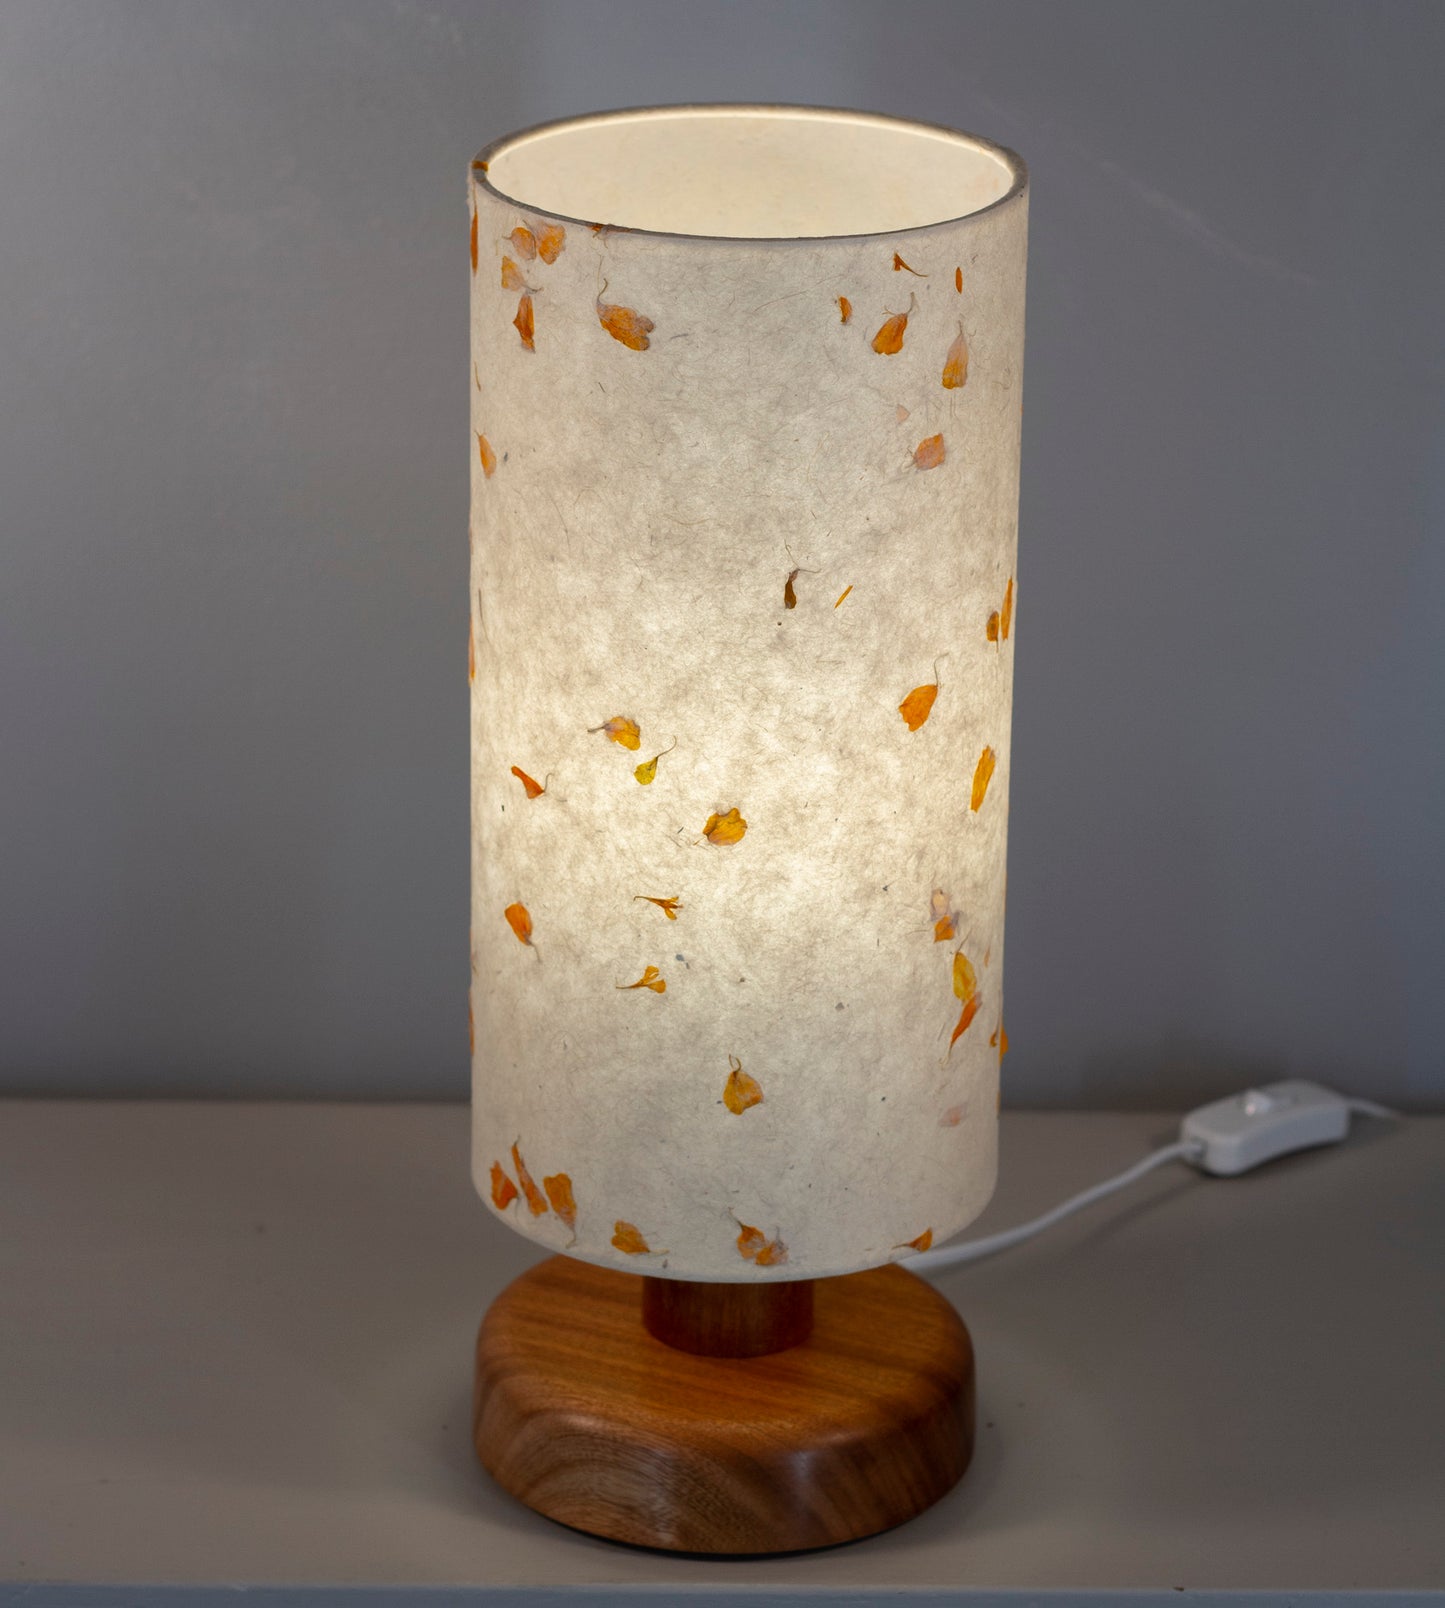 Round Sapele Table Lamp with 15cm x 30cm Lampshade in P32 ~ Marigold Petals